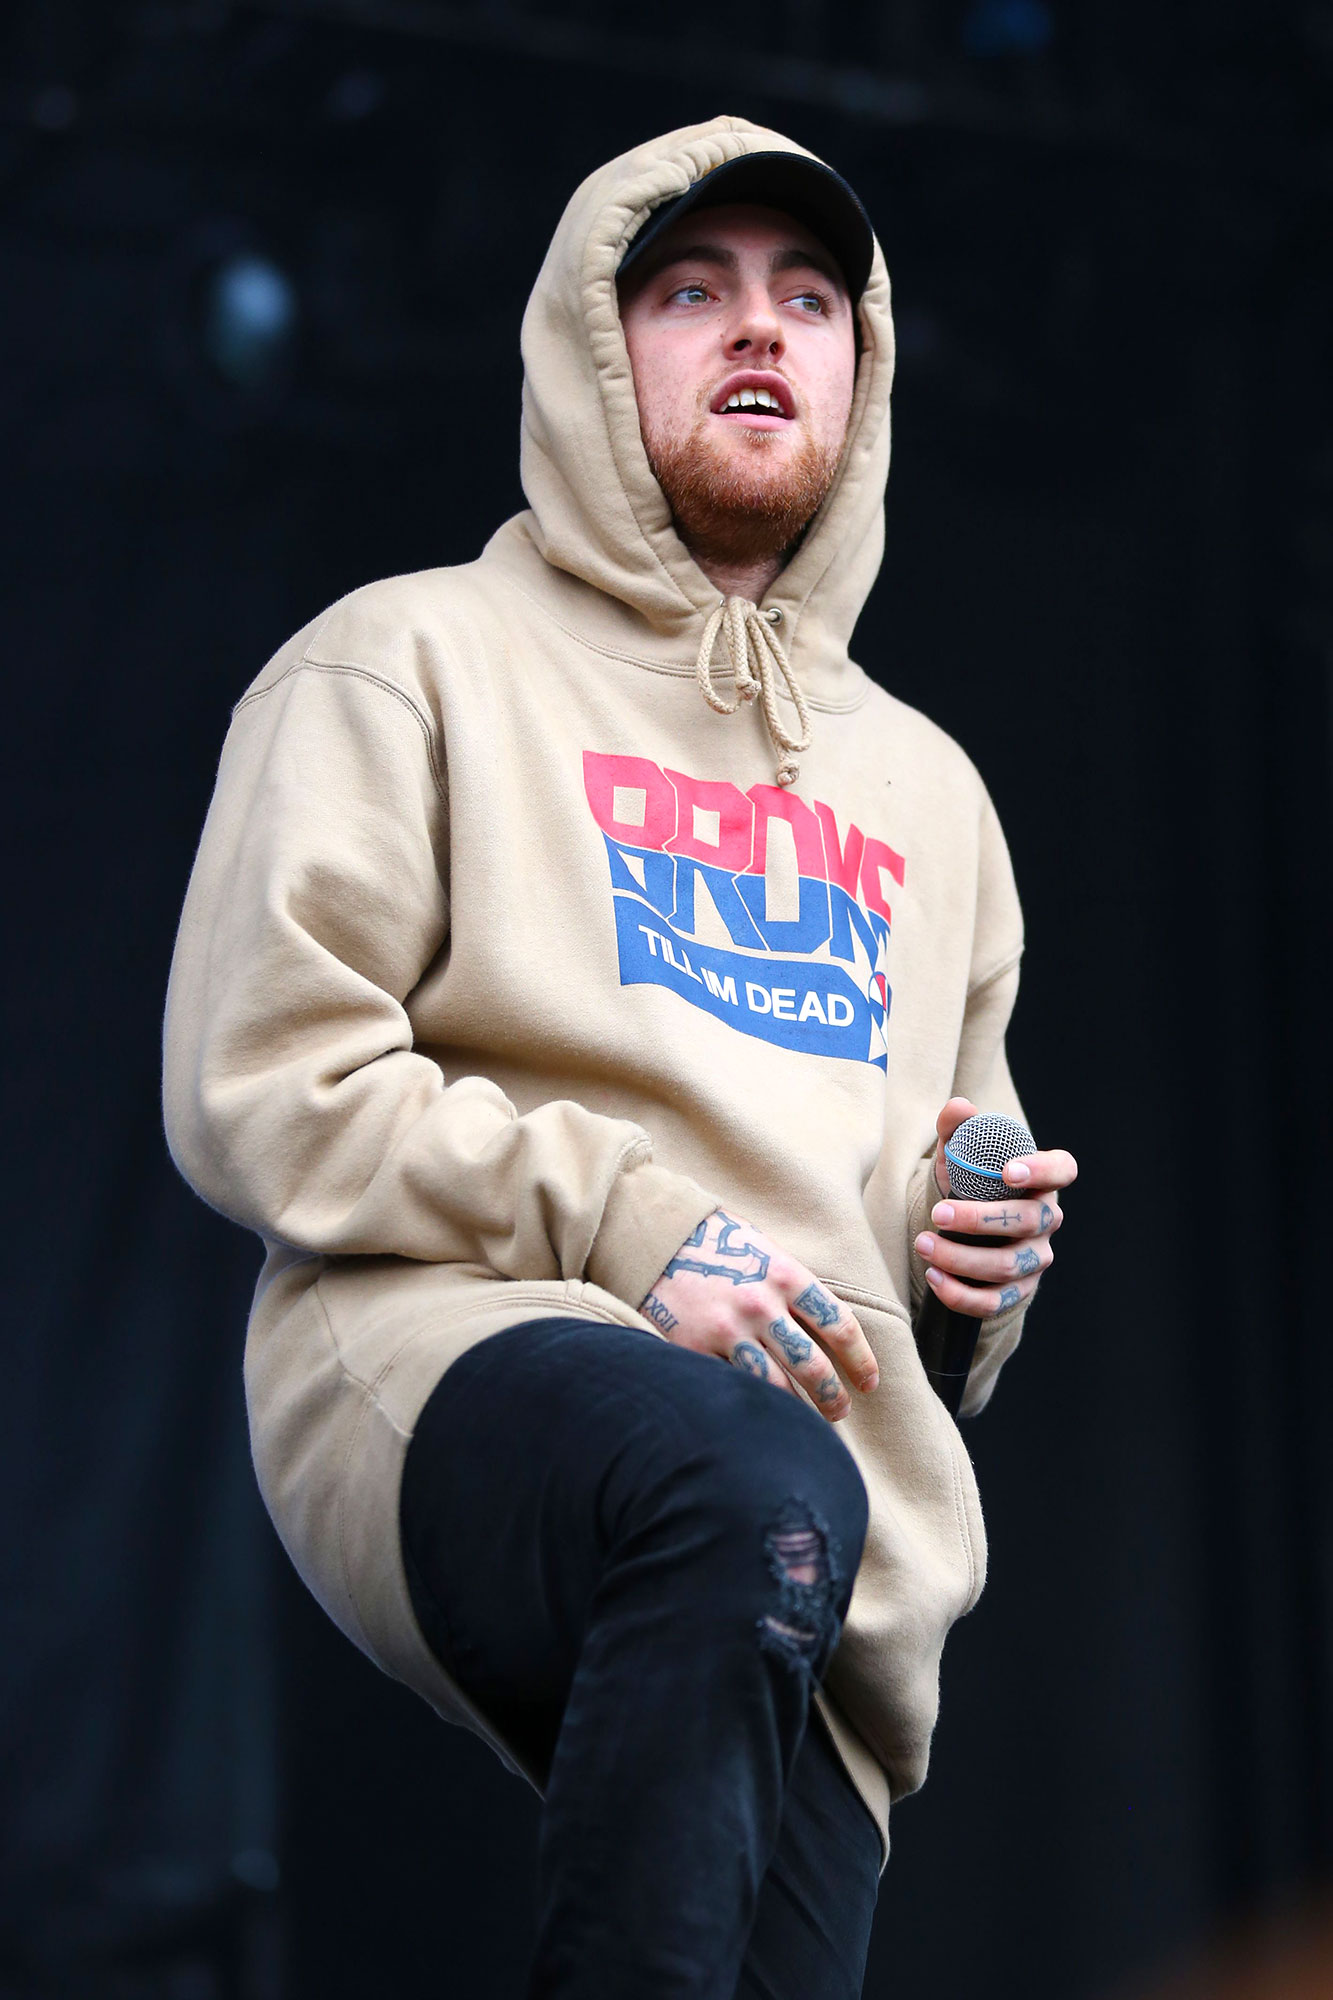 The Mac Miller Memoir on X: Mac honestly had the freshest outfits